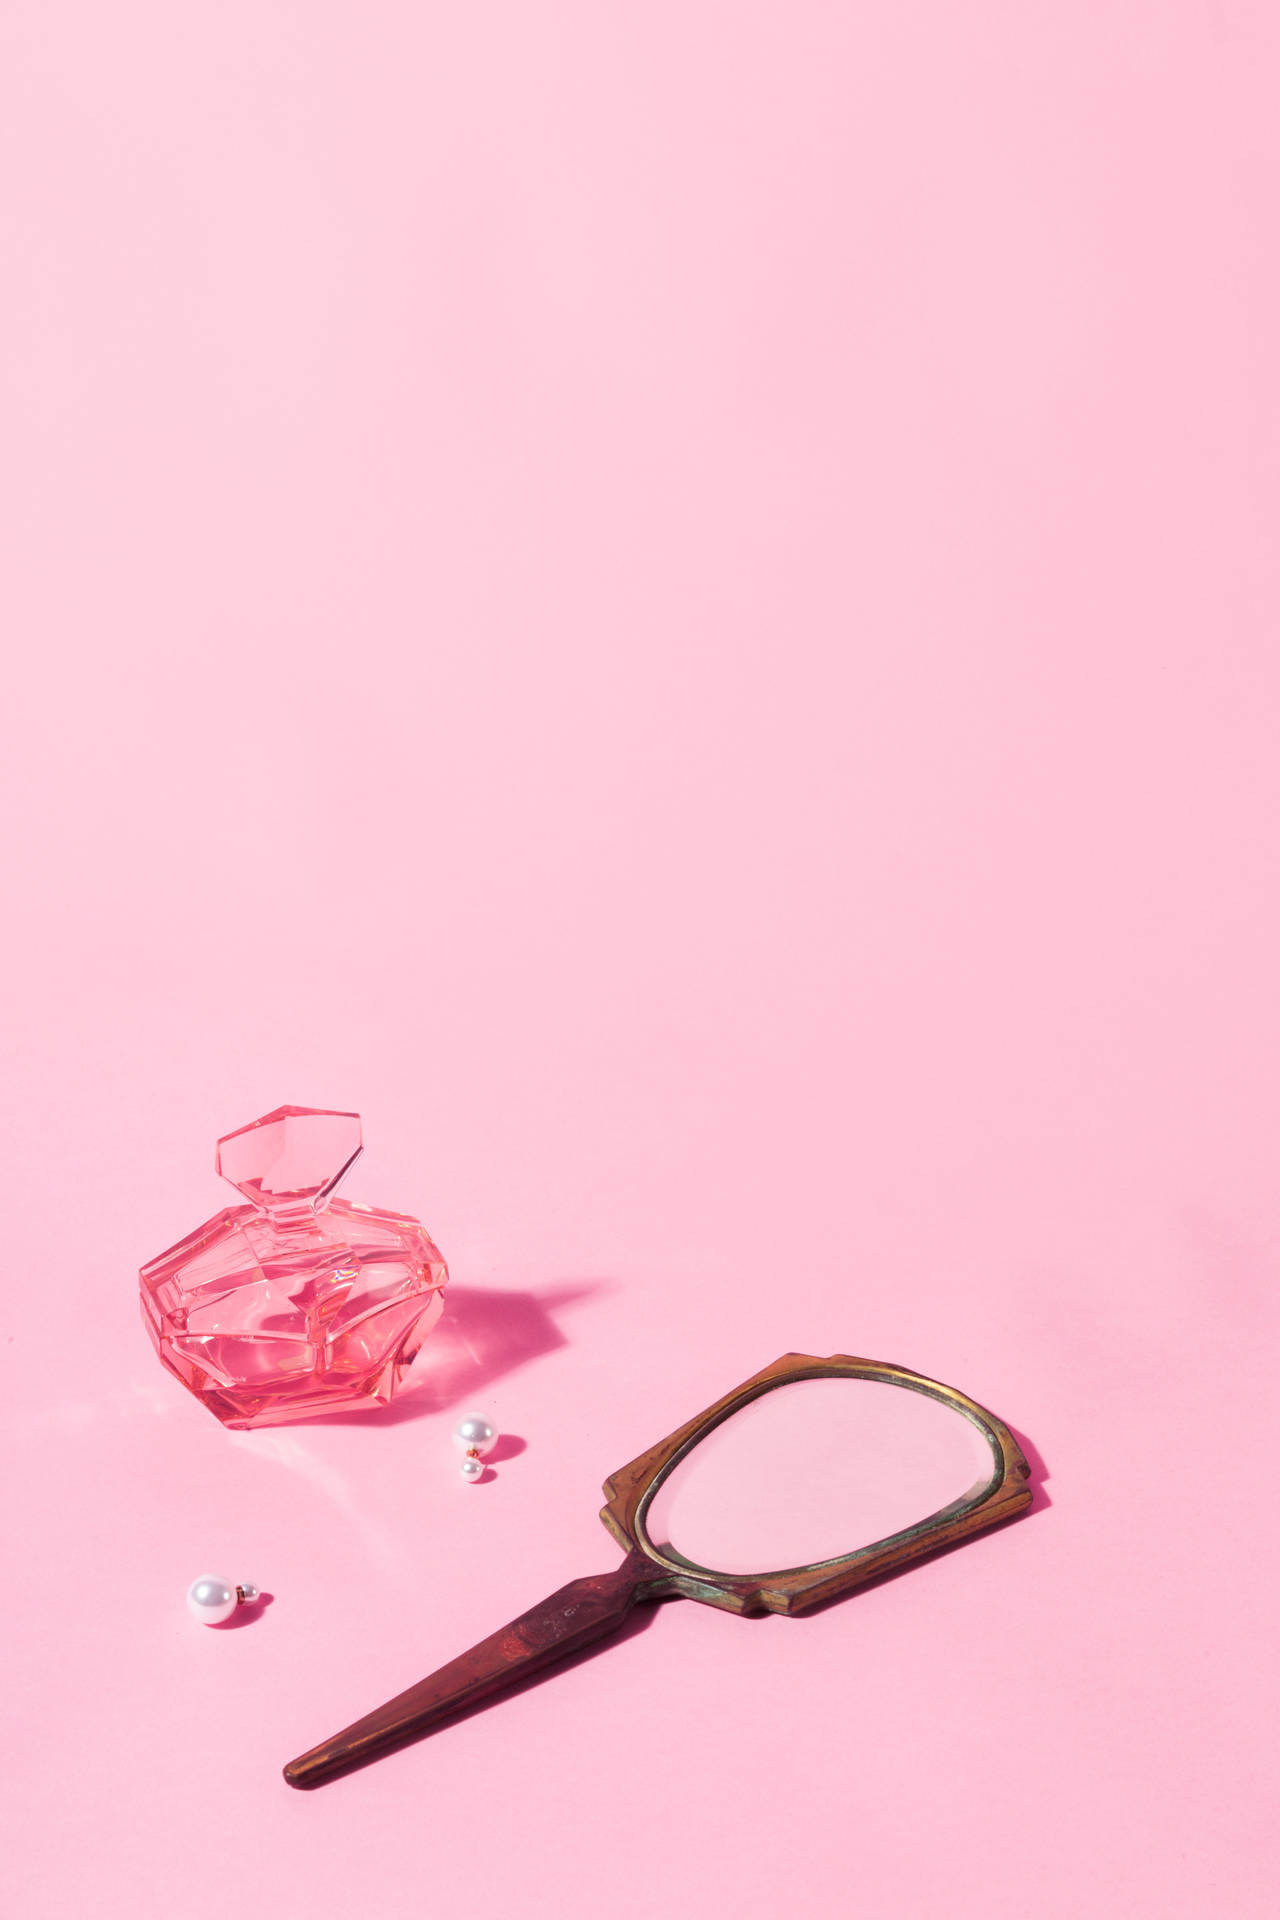 Trinkets On Pastel Pink Color Table Wallpaper